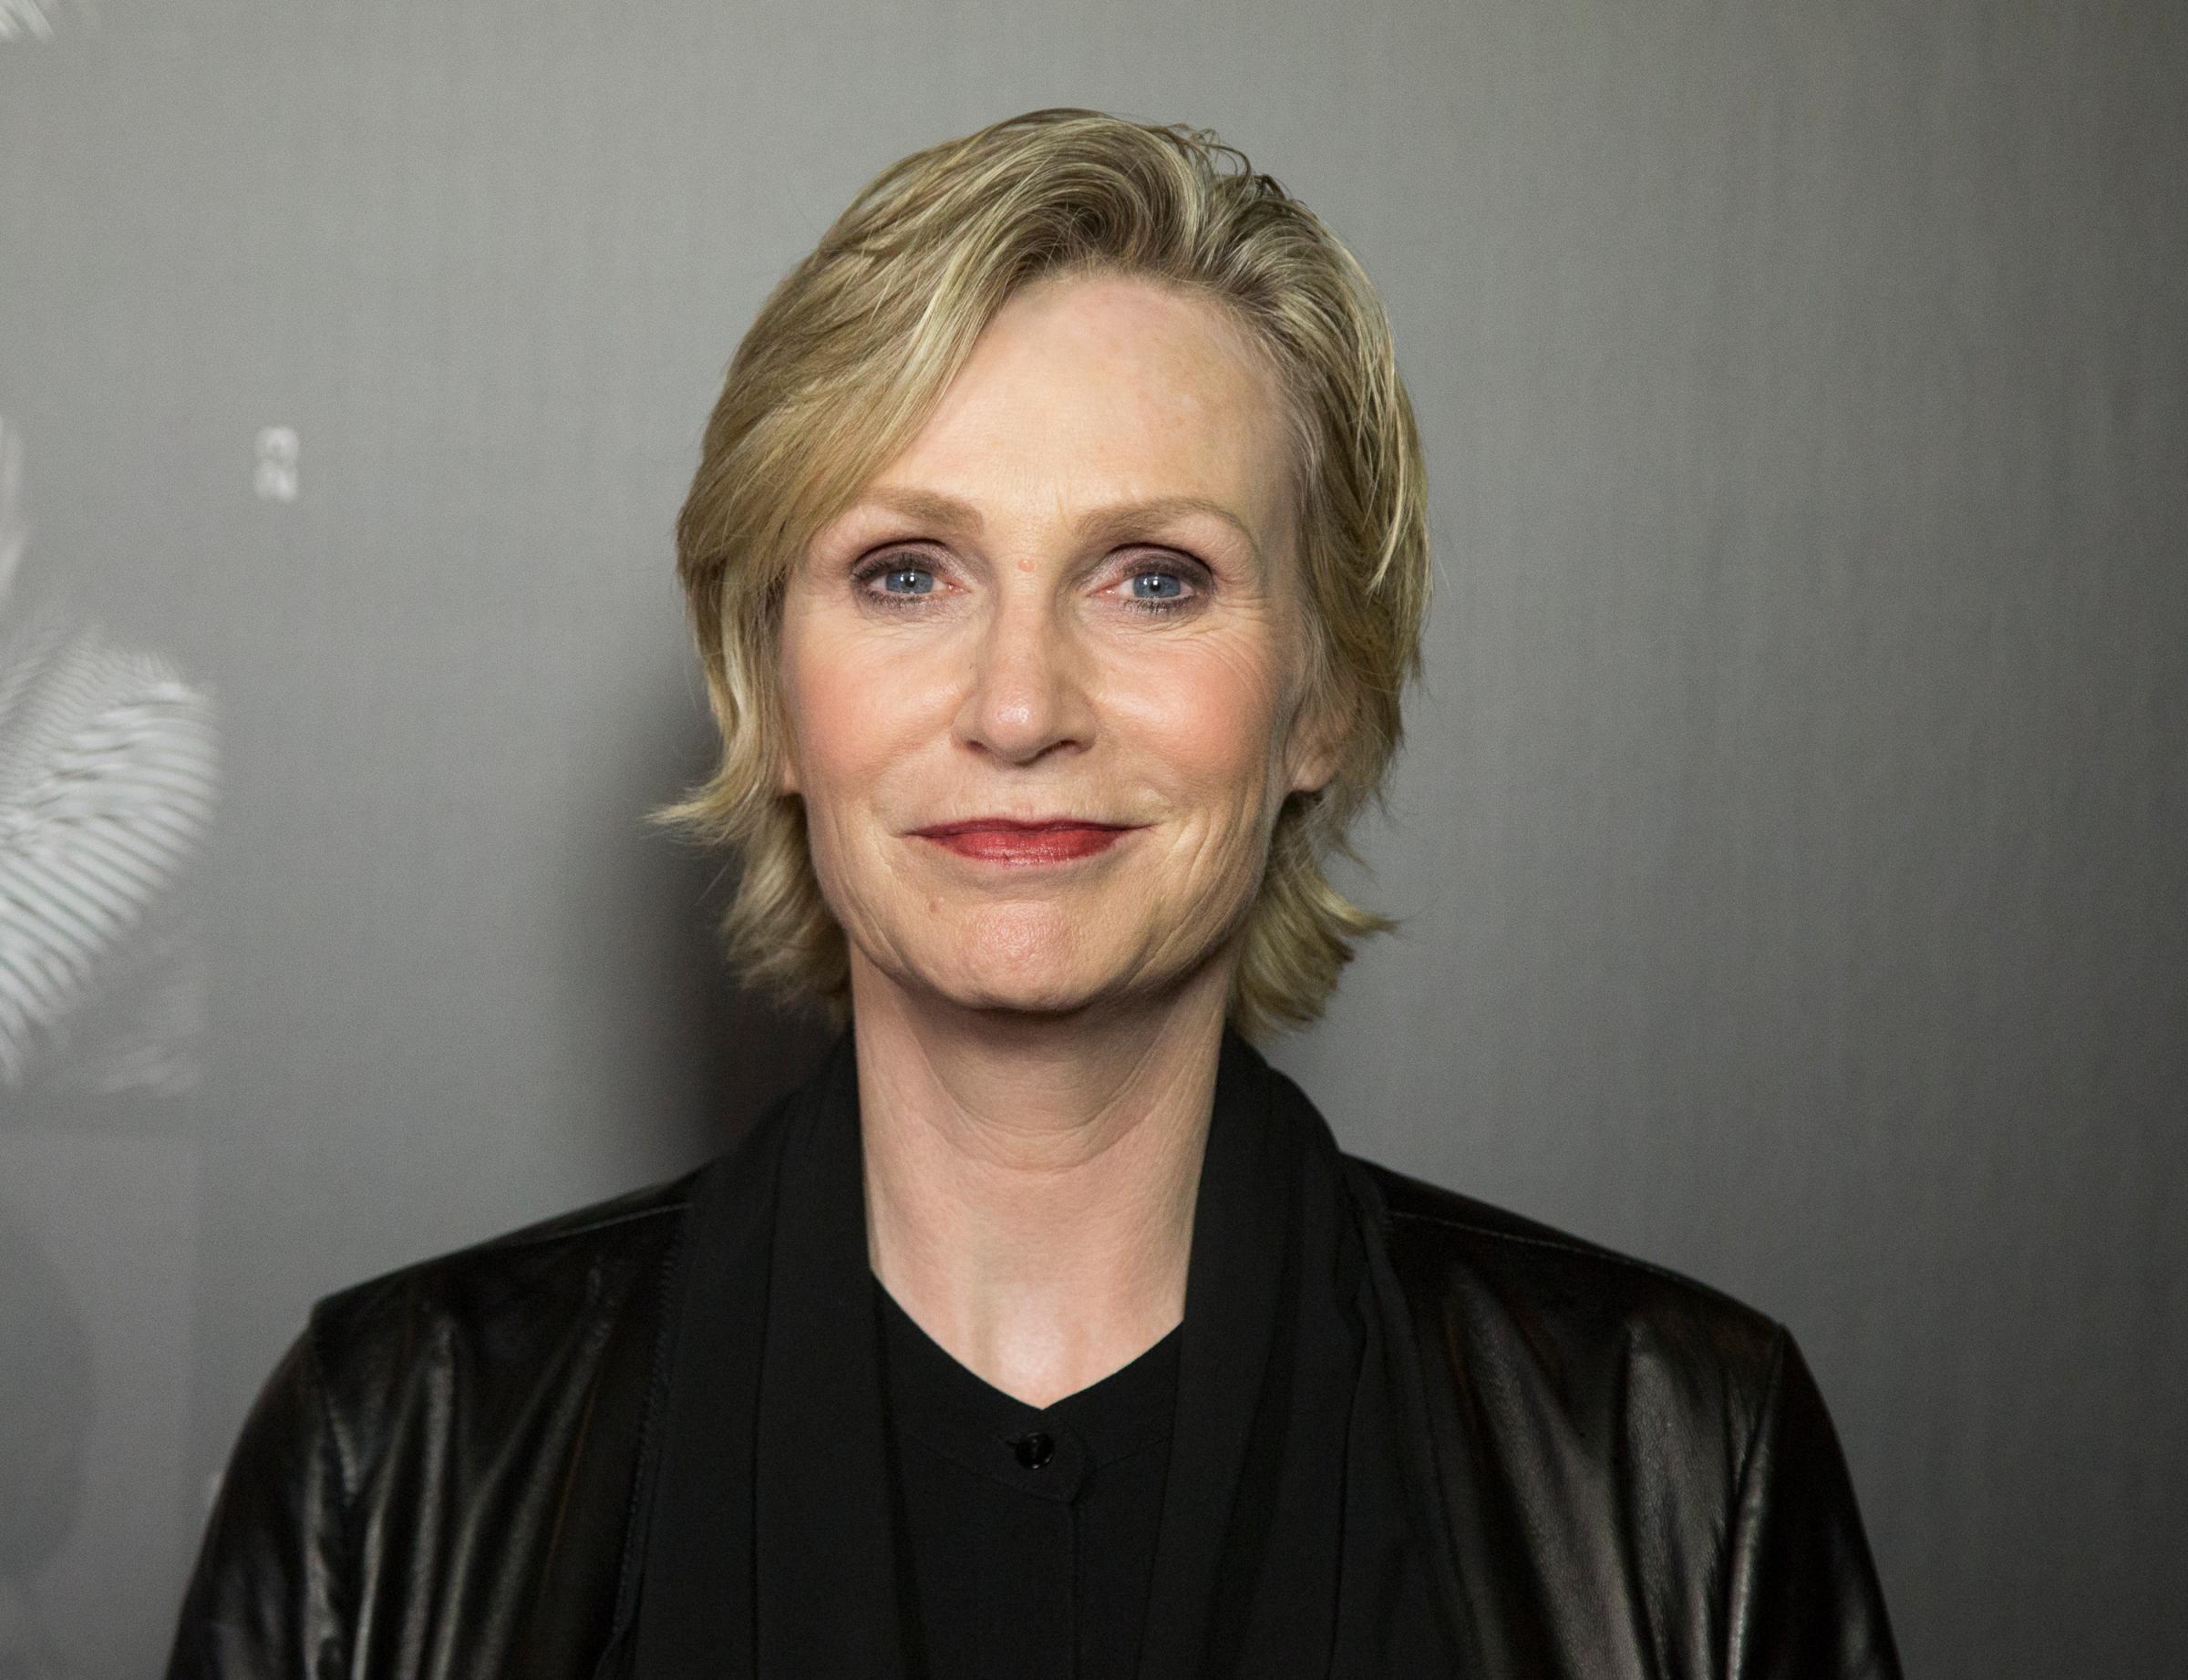 Actress Jane Lynch attends the premiere of HBO's "Everything Is Copy" at TCL Chinese Theatre on March 10, 2016 in Hollywood, California.